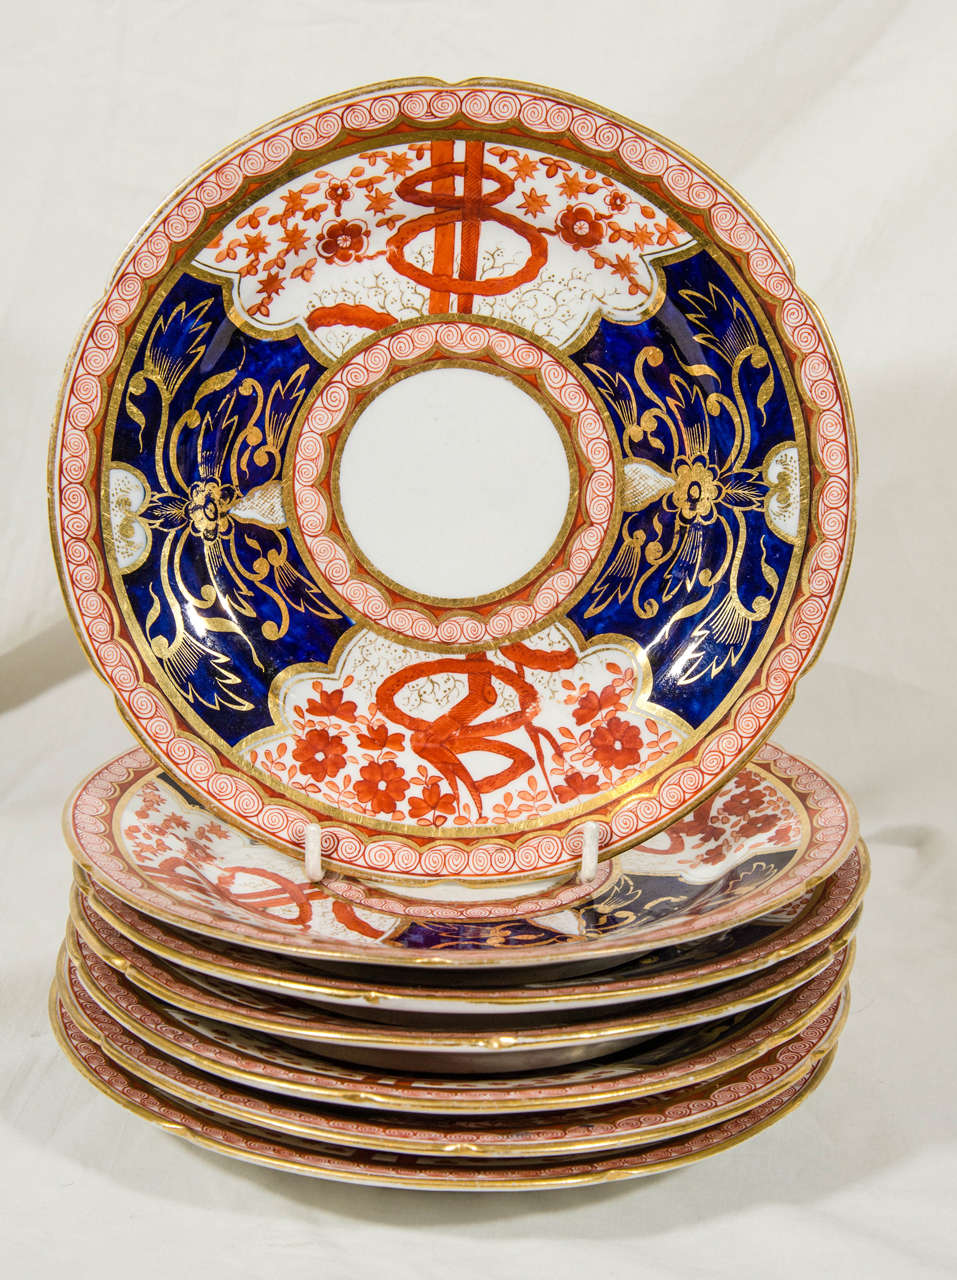 A group of a dozen Imari inspired dessert dishes in the 